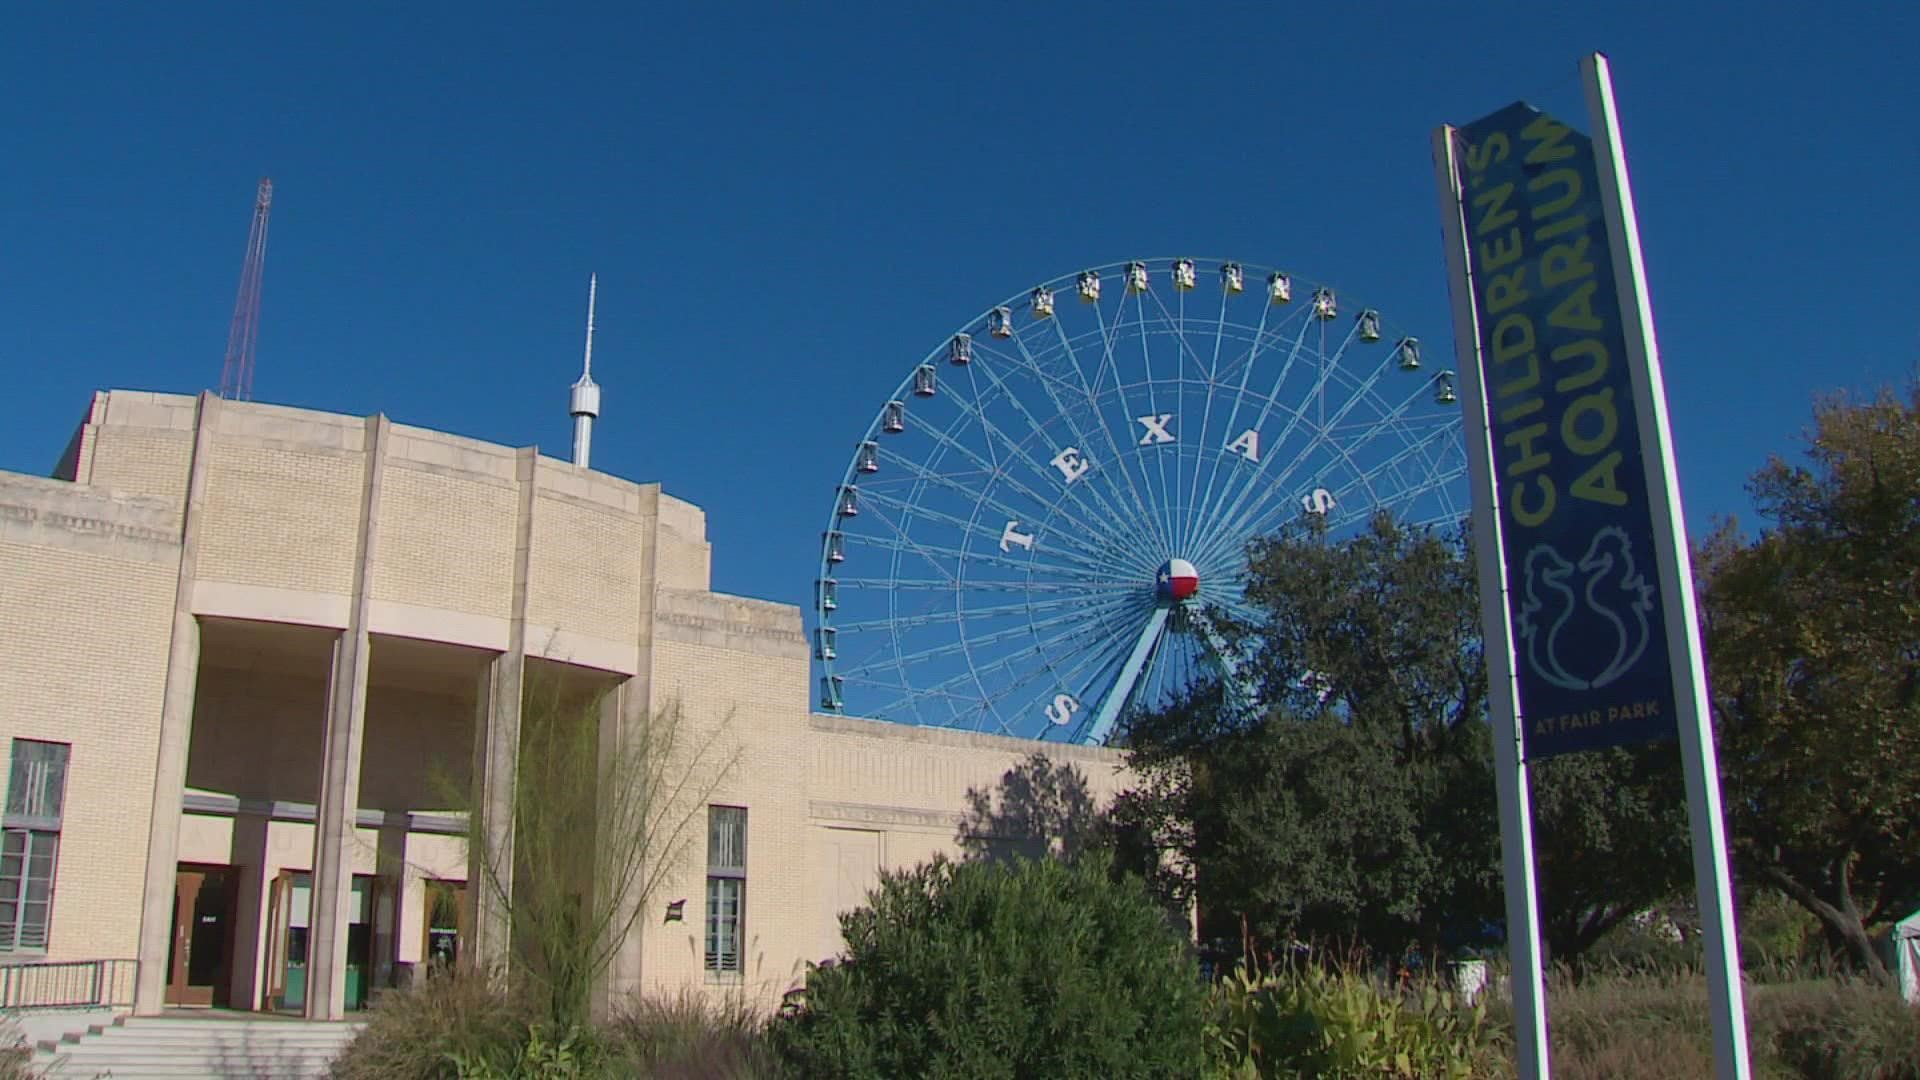 The council is voting on whether to accept a resolution that would help fix venues in the Fair Park area.